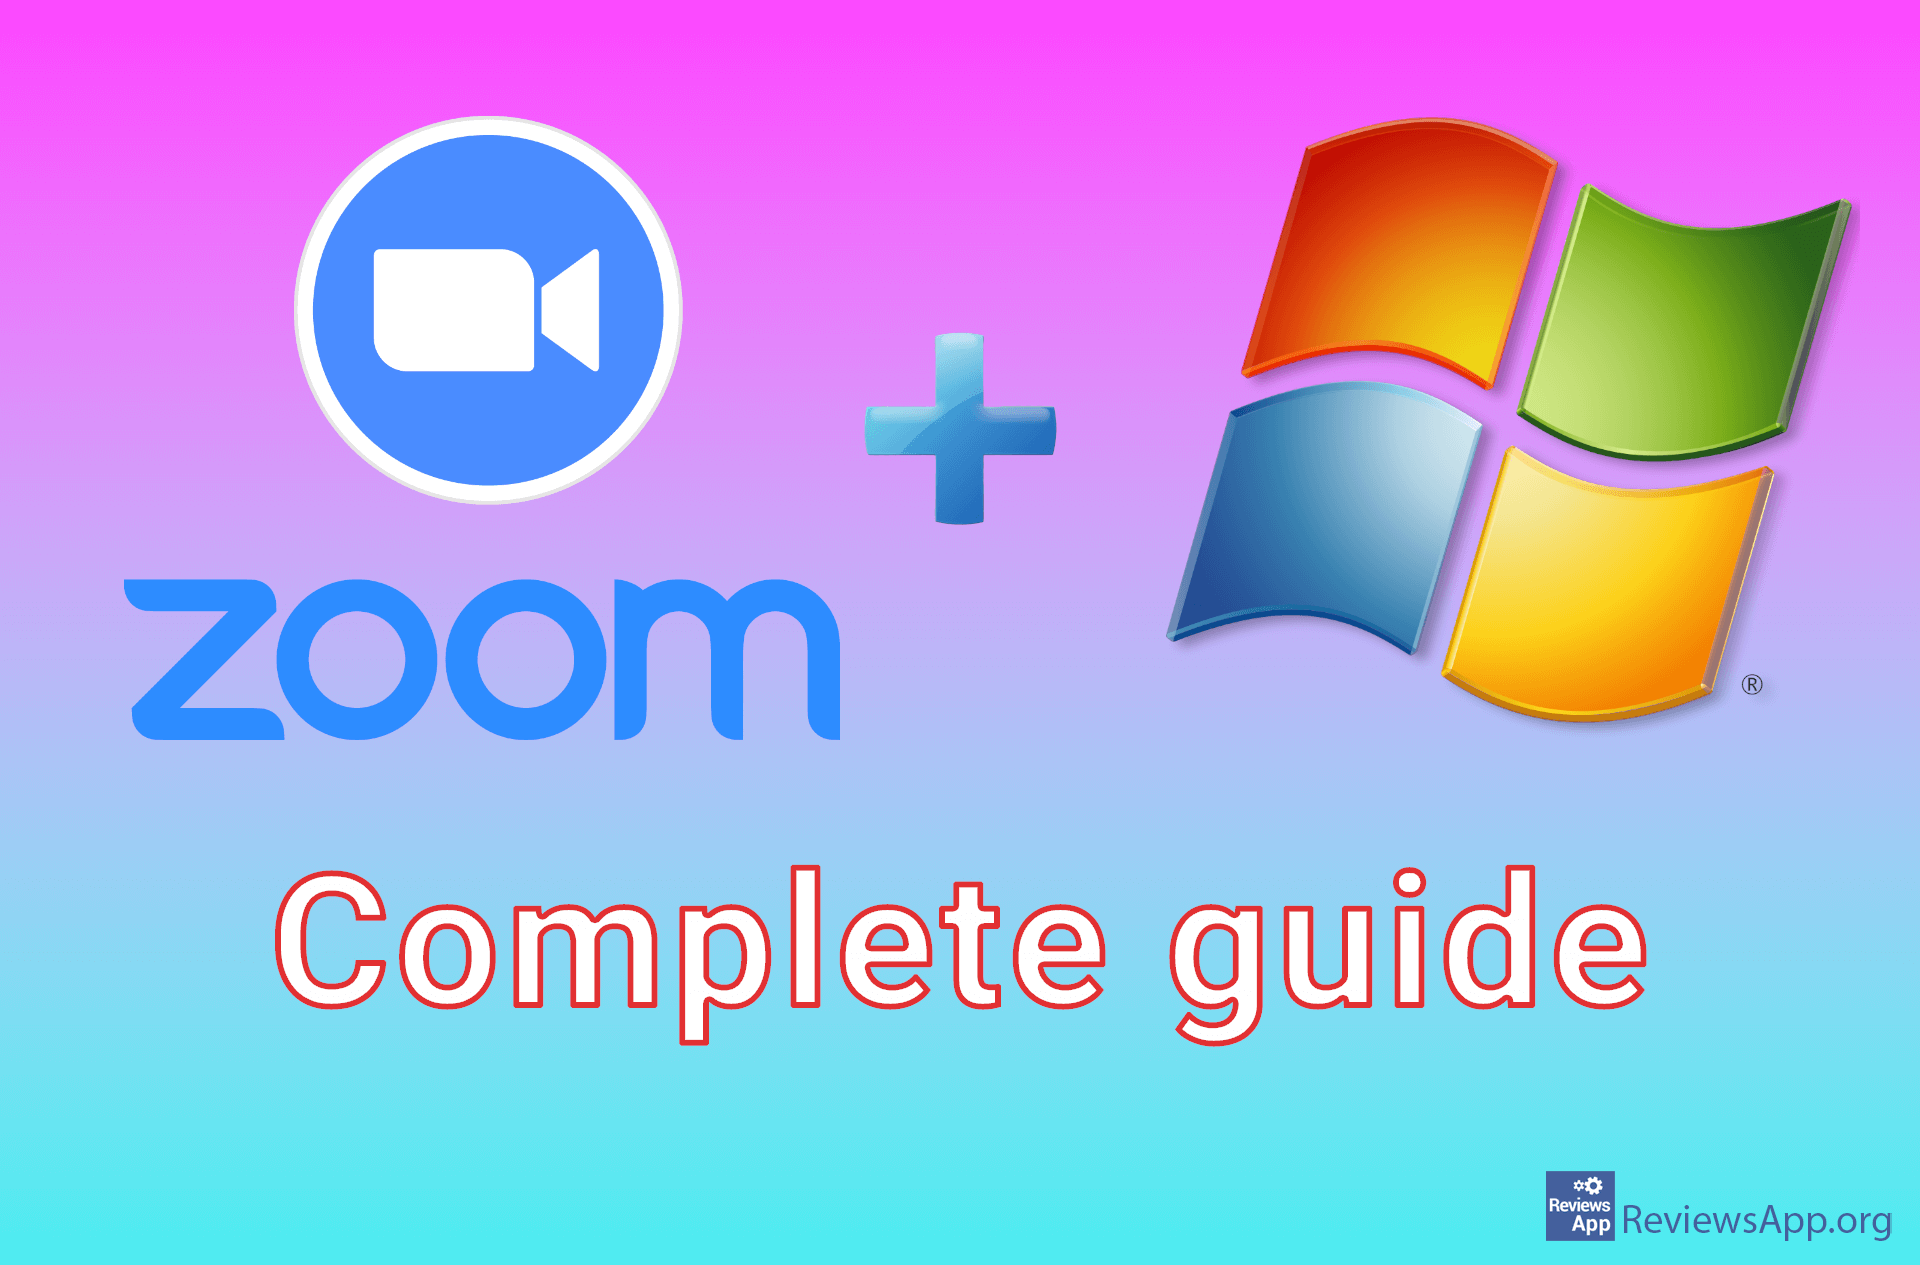 download latest zoom for windows